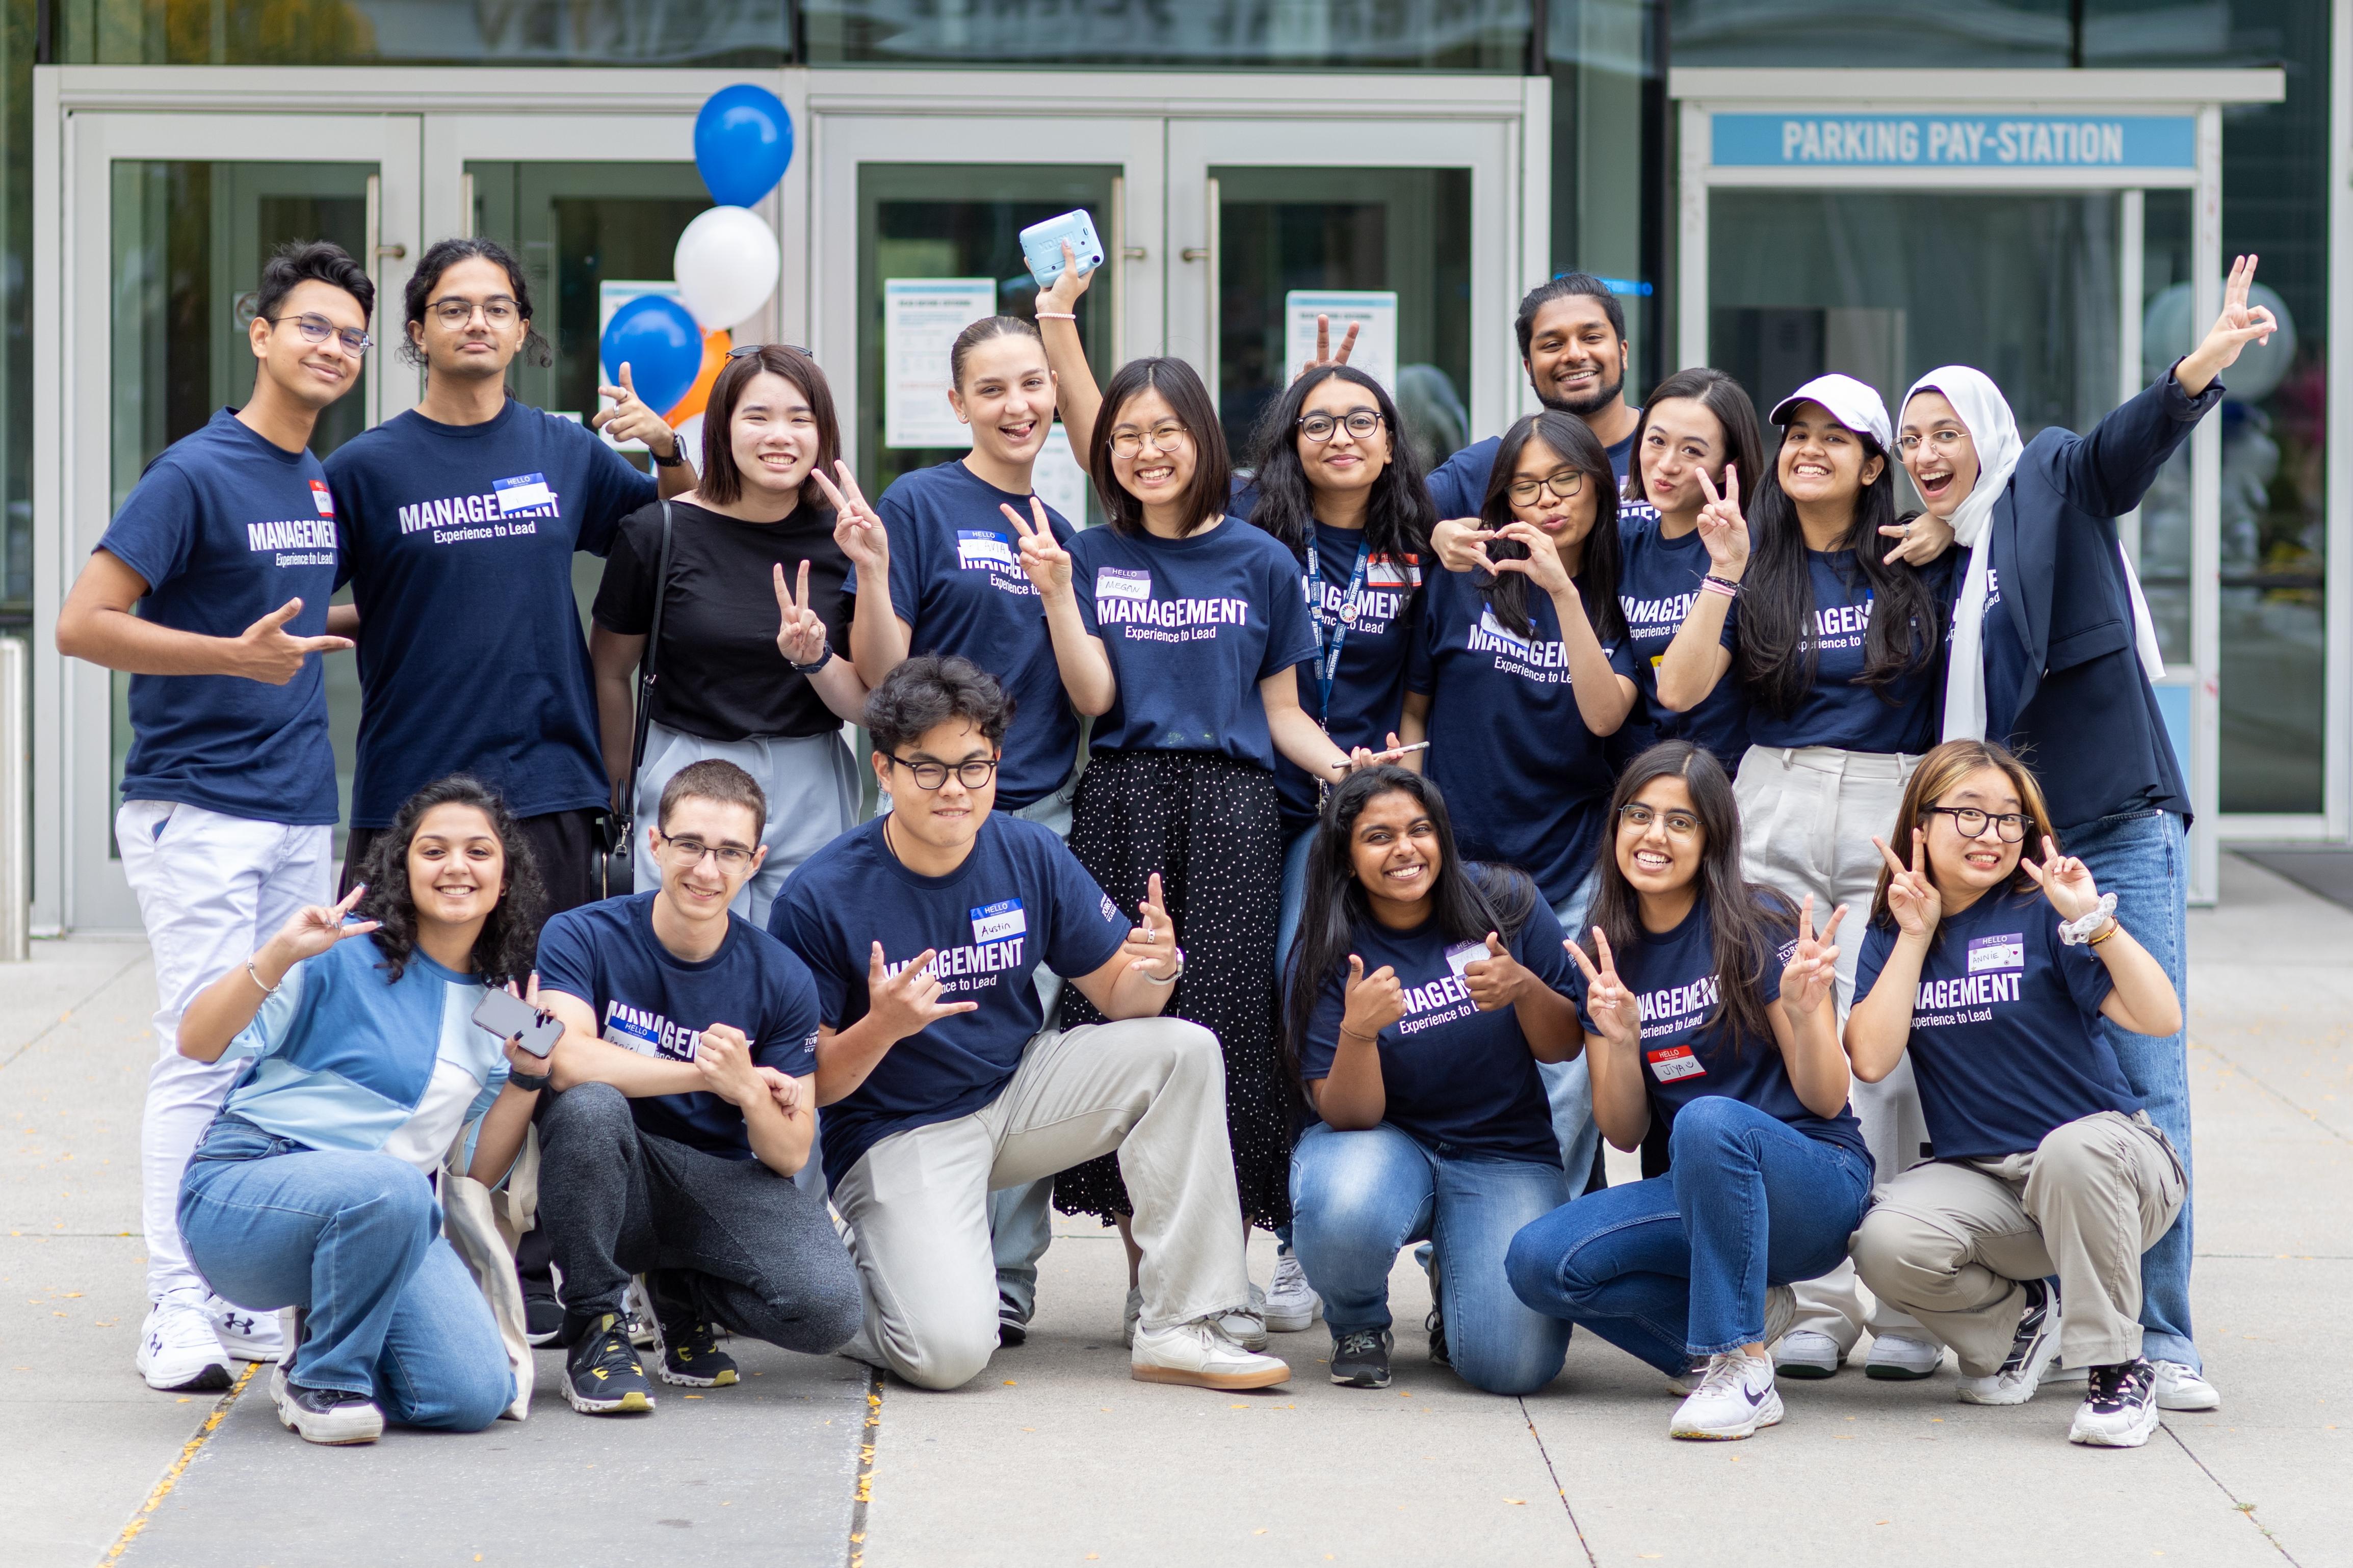 Group photo of the Management and Economics Students' Association (MESA) celebrating at Management Orientation outside of the Instructional Centre at the University of Toronto Scarborough.